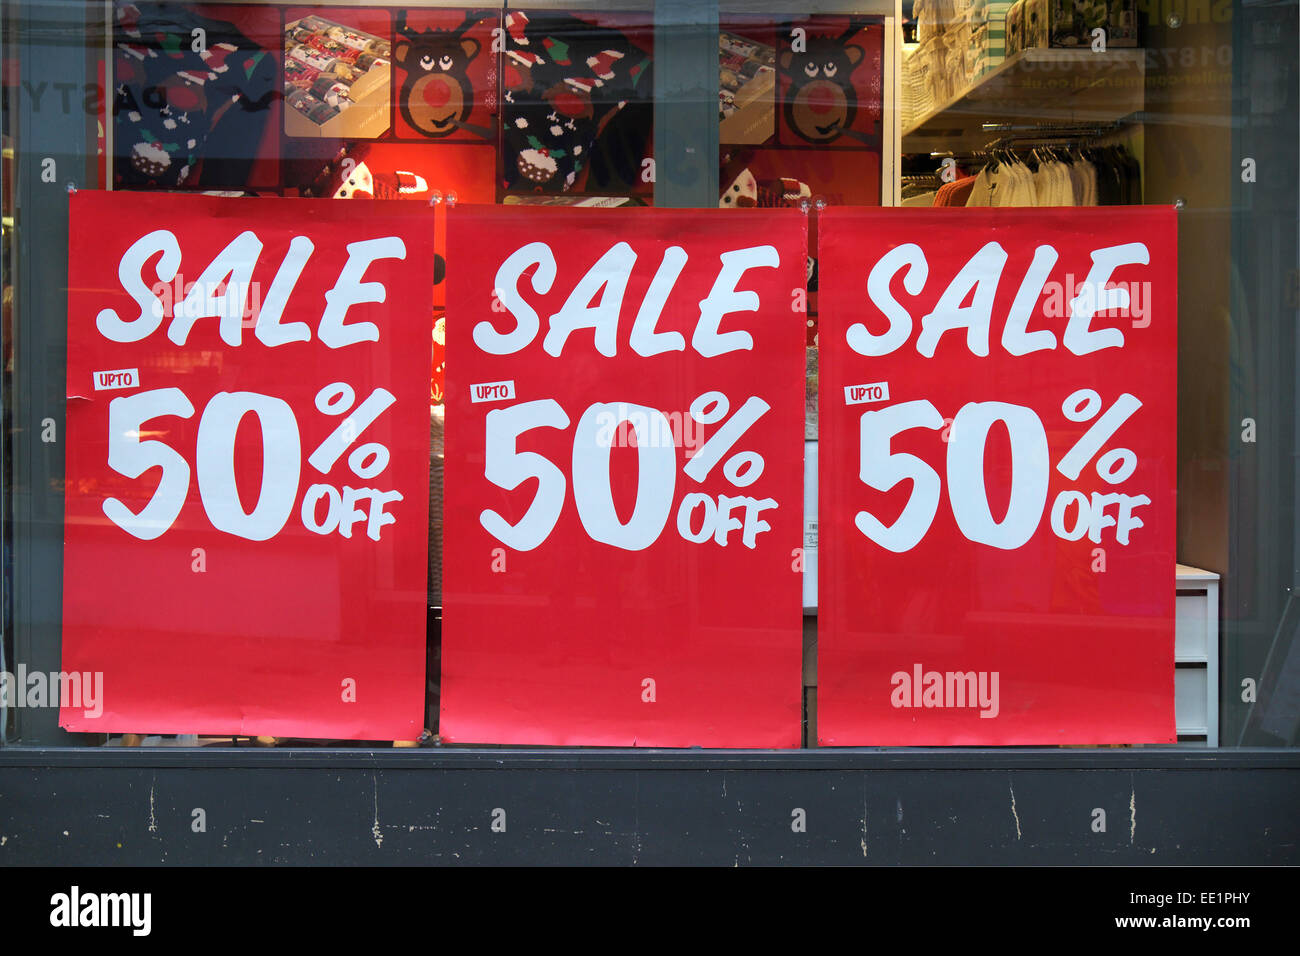 Sale signs in a shop window. Stock Photo